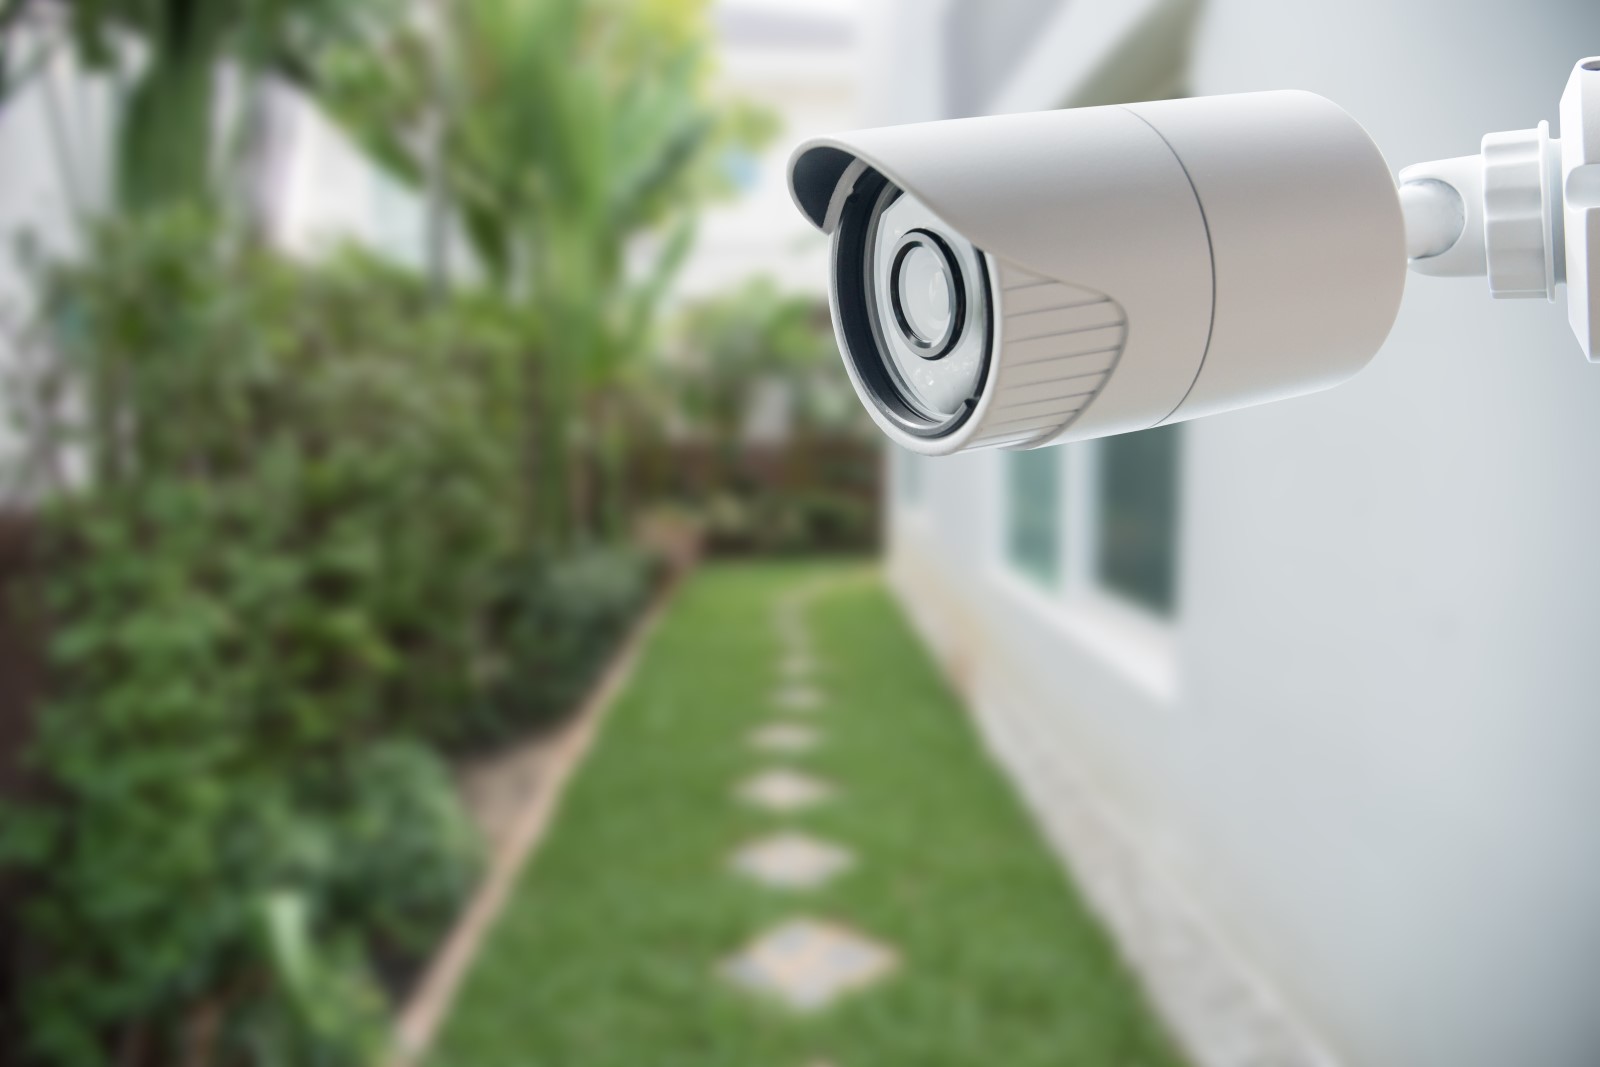 a home video surveillance system camera mounted on the exterior of a home near a grassy pathway